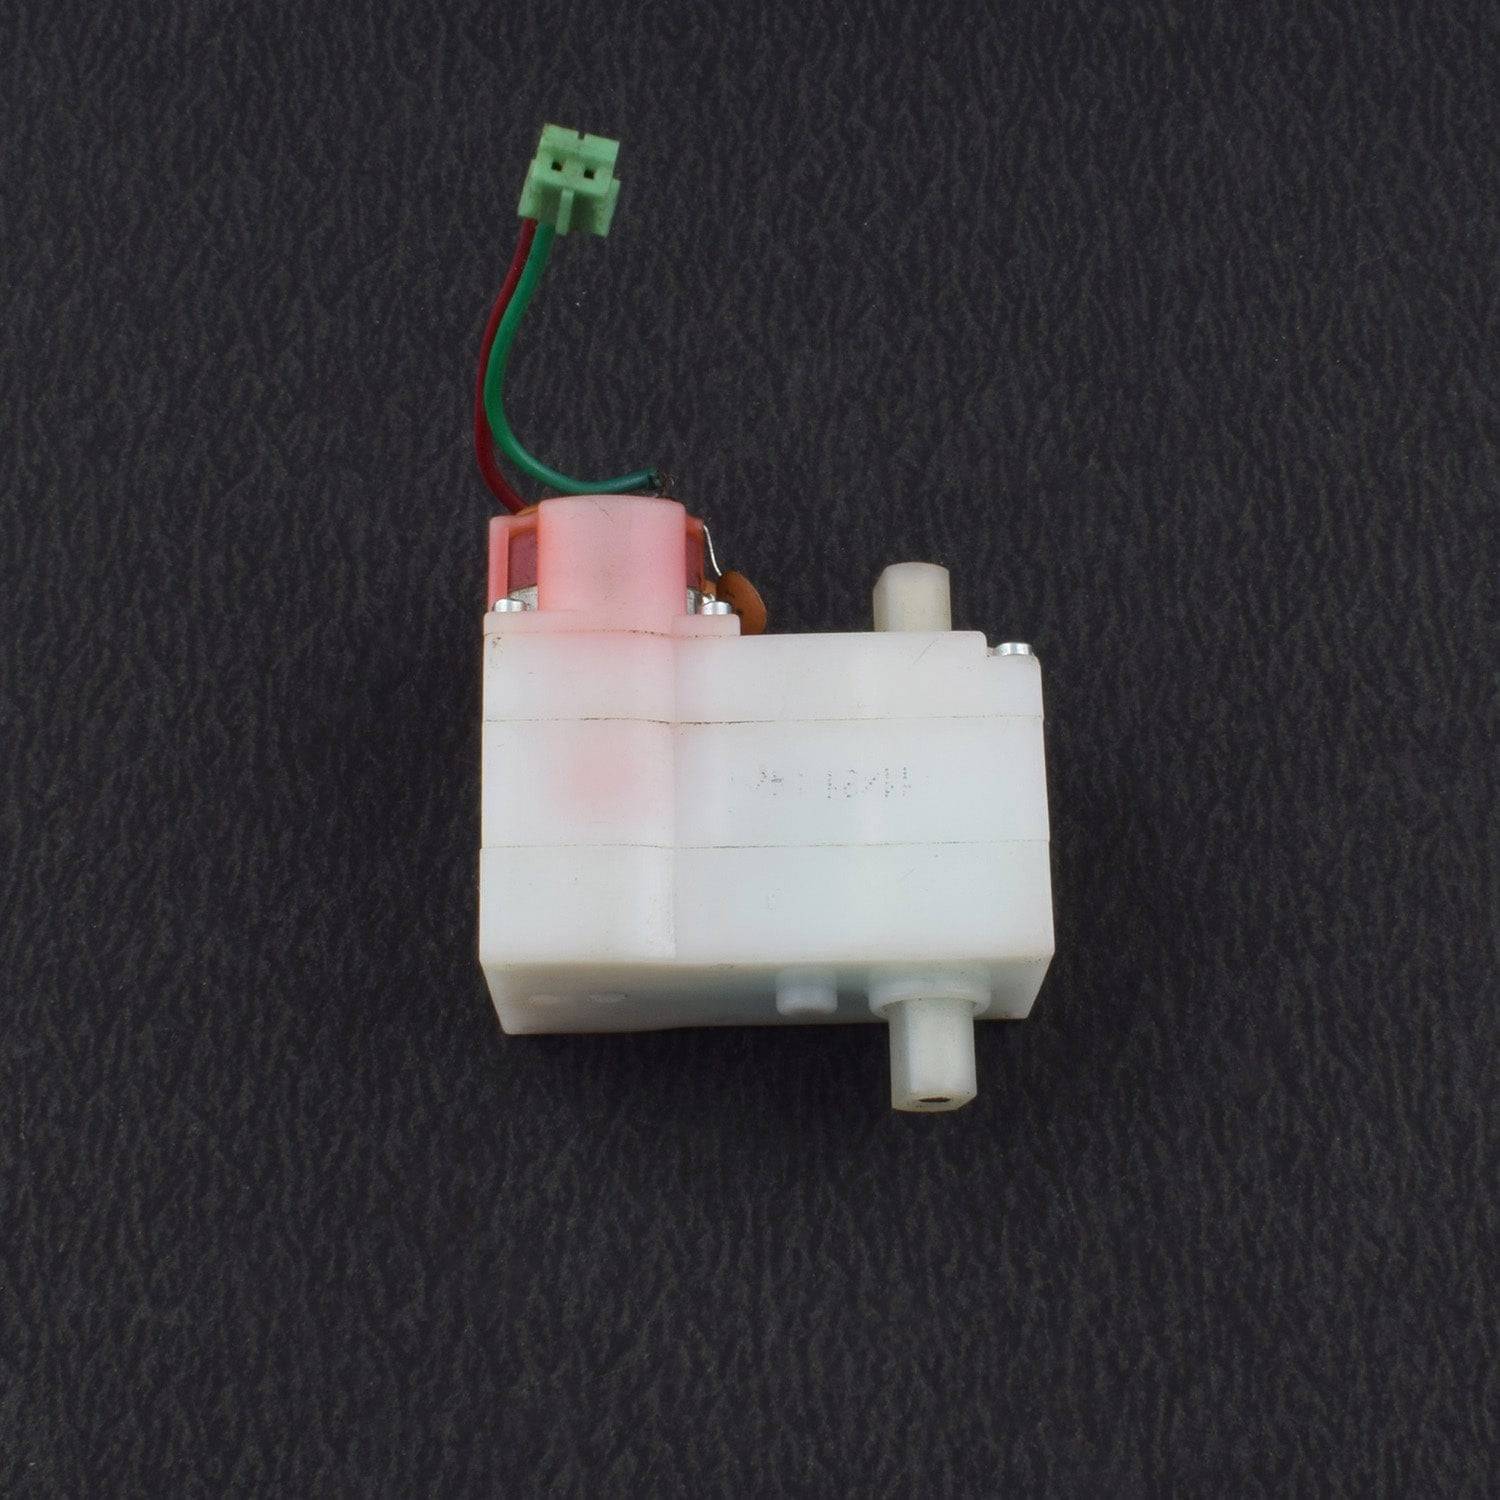 180 RPM Micro DC Geared Motor With Back Shaft - RS021 - REES52